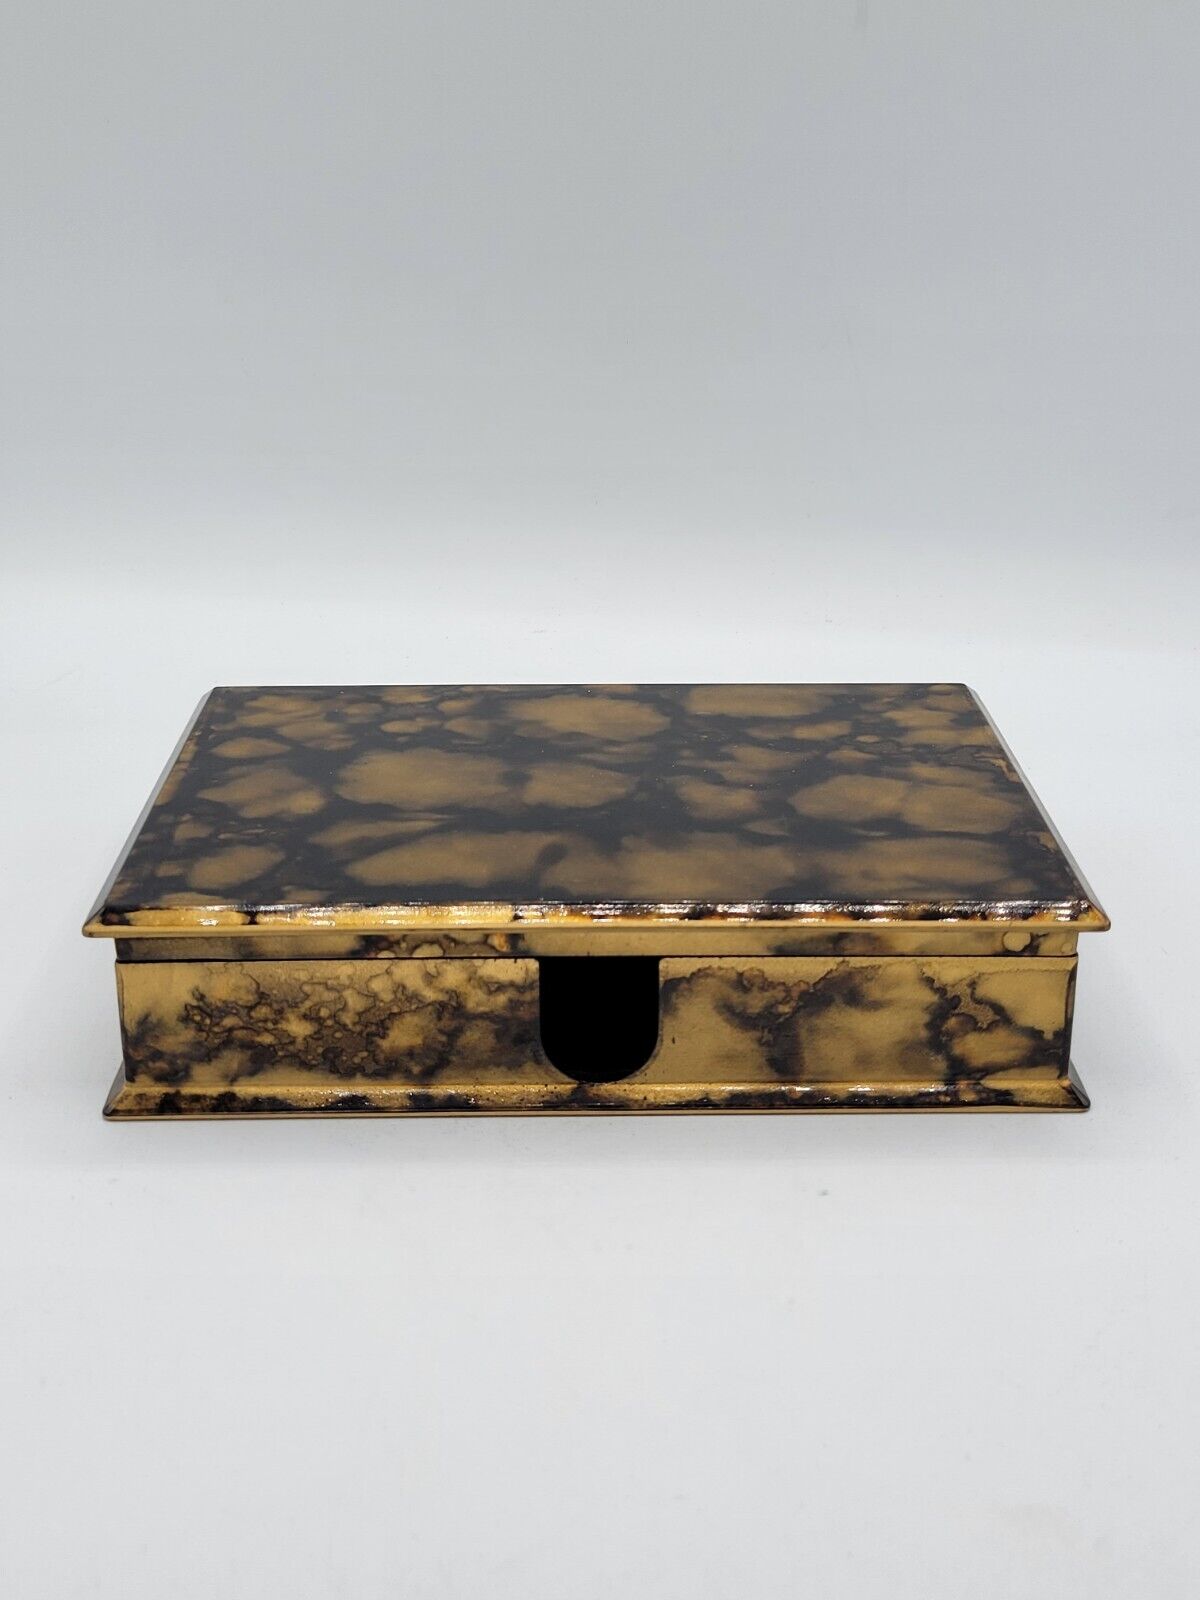 Vintage Otagiri Japan Lacquerware Stationary Note Box Black and Gold